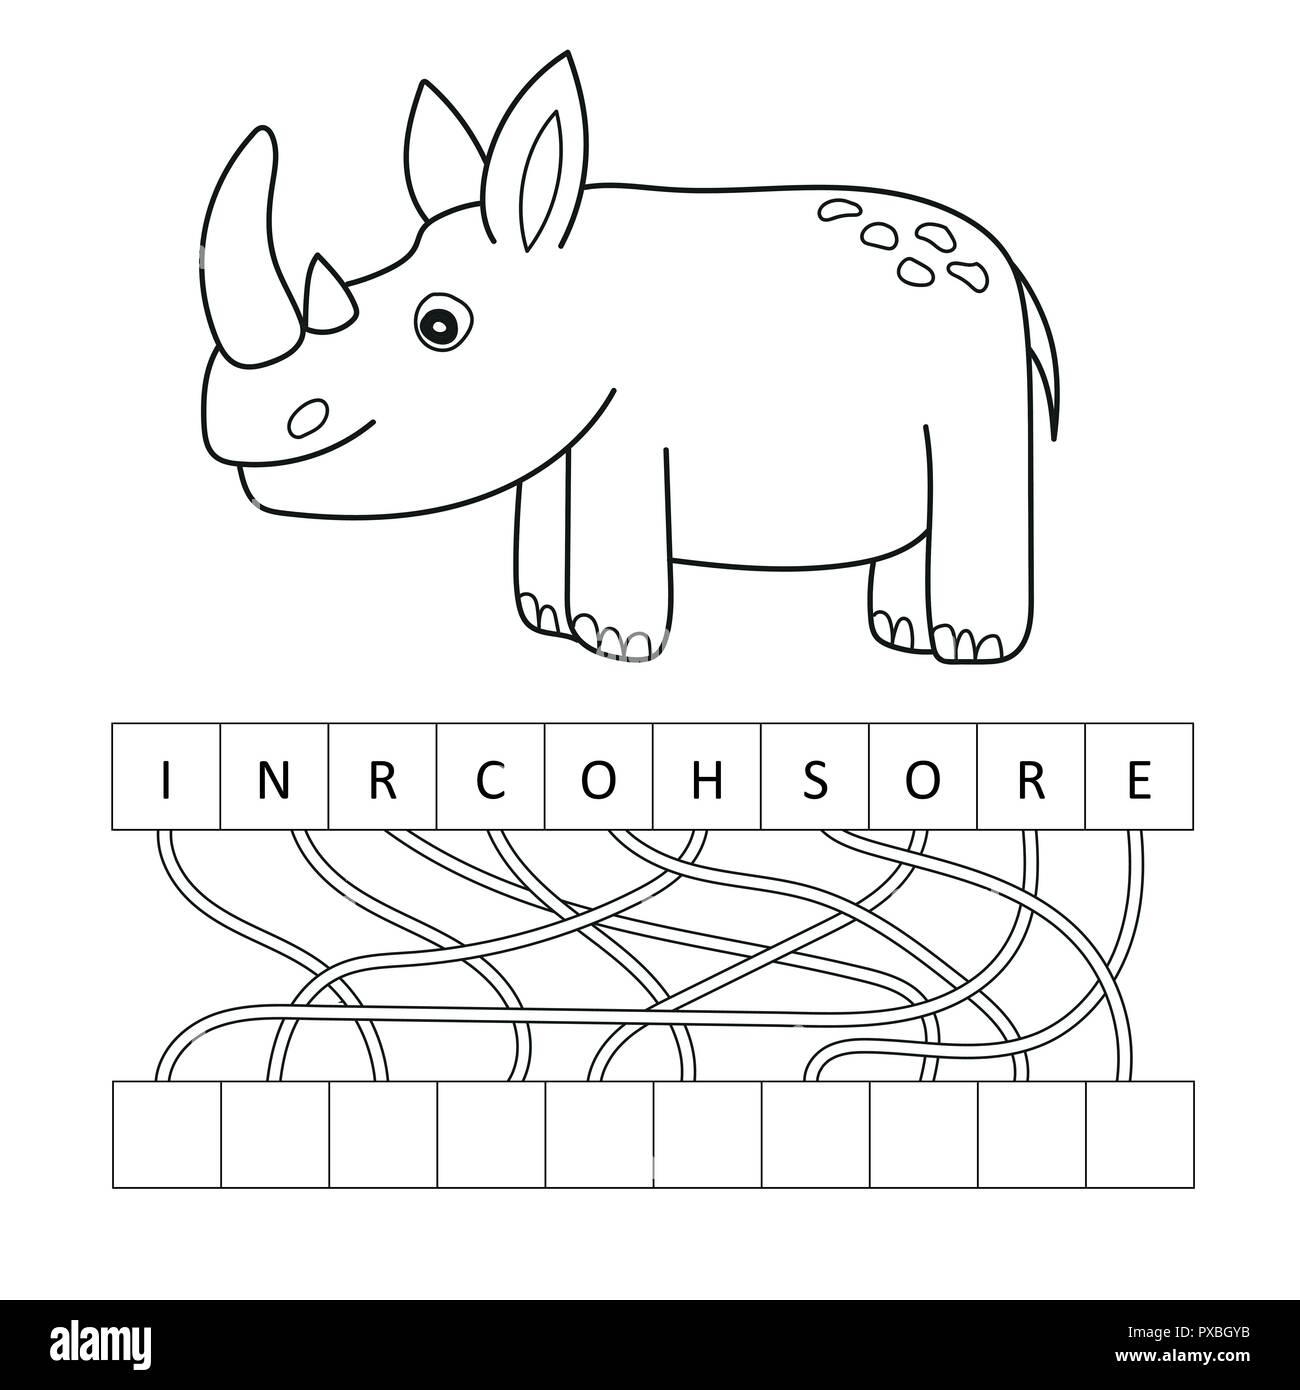 Coloring page outline of cartoon cute rhino. Vector illustration, coloring book Stock Vector